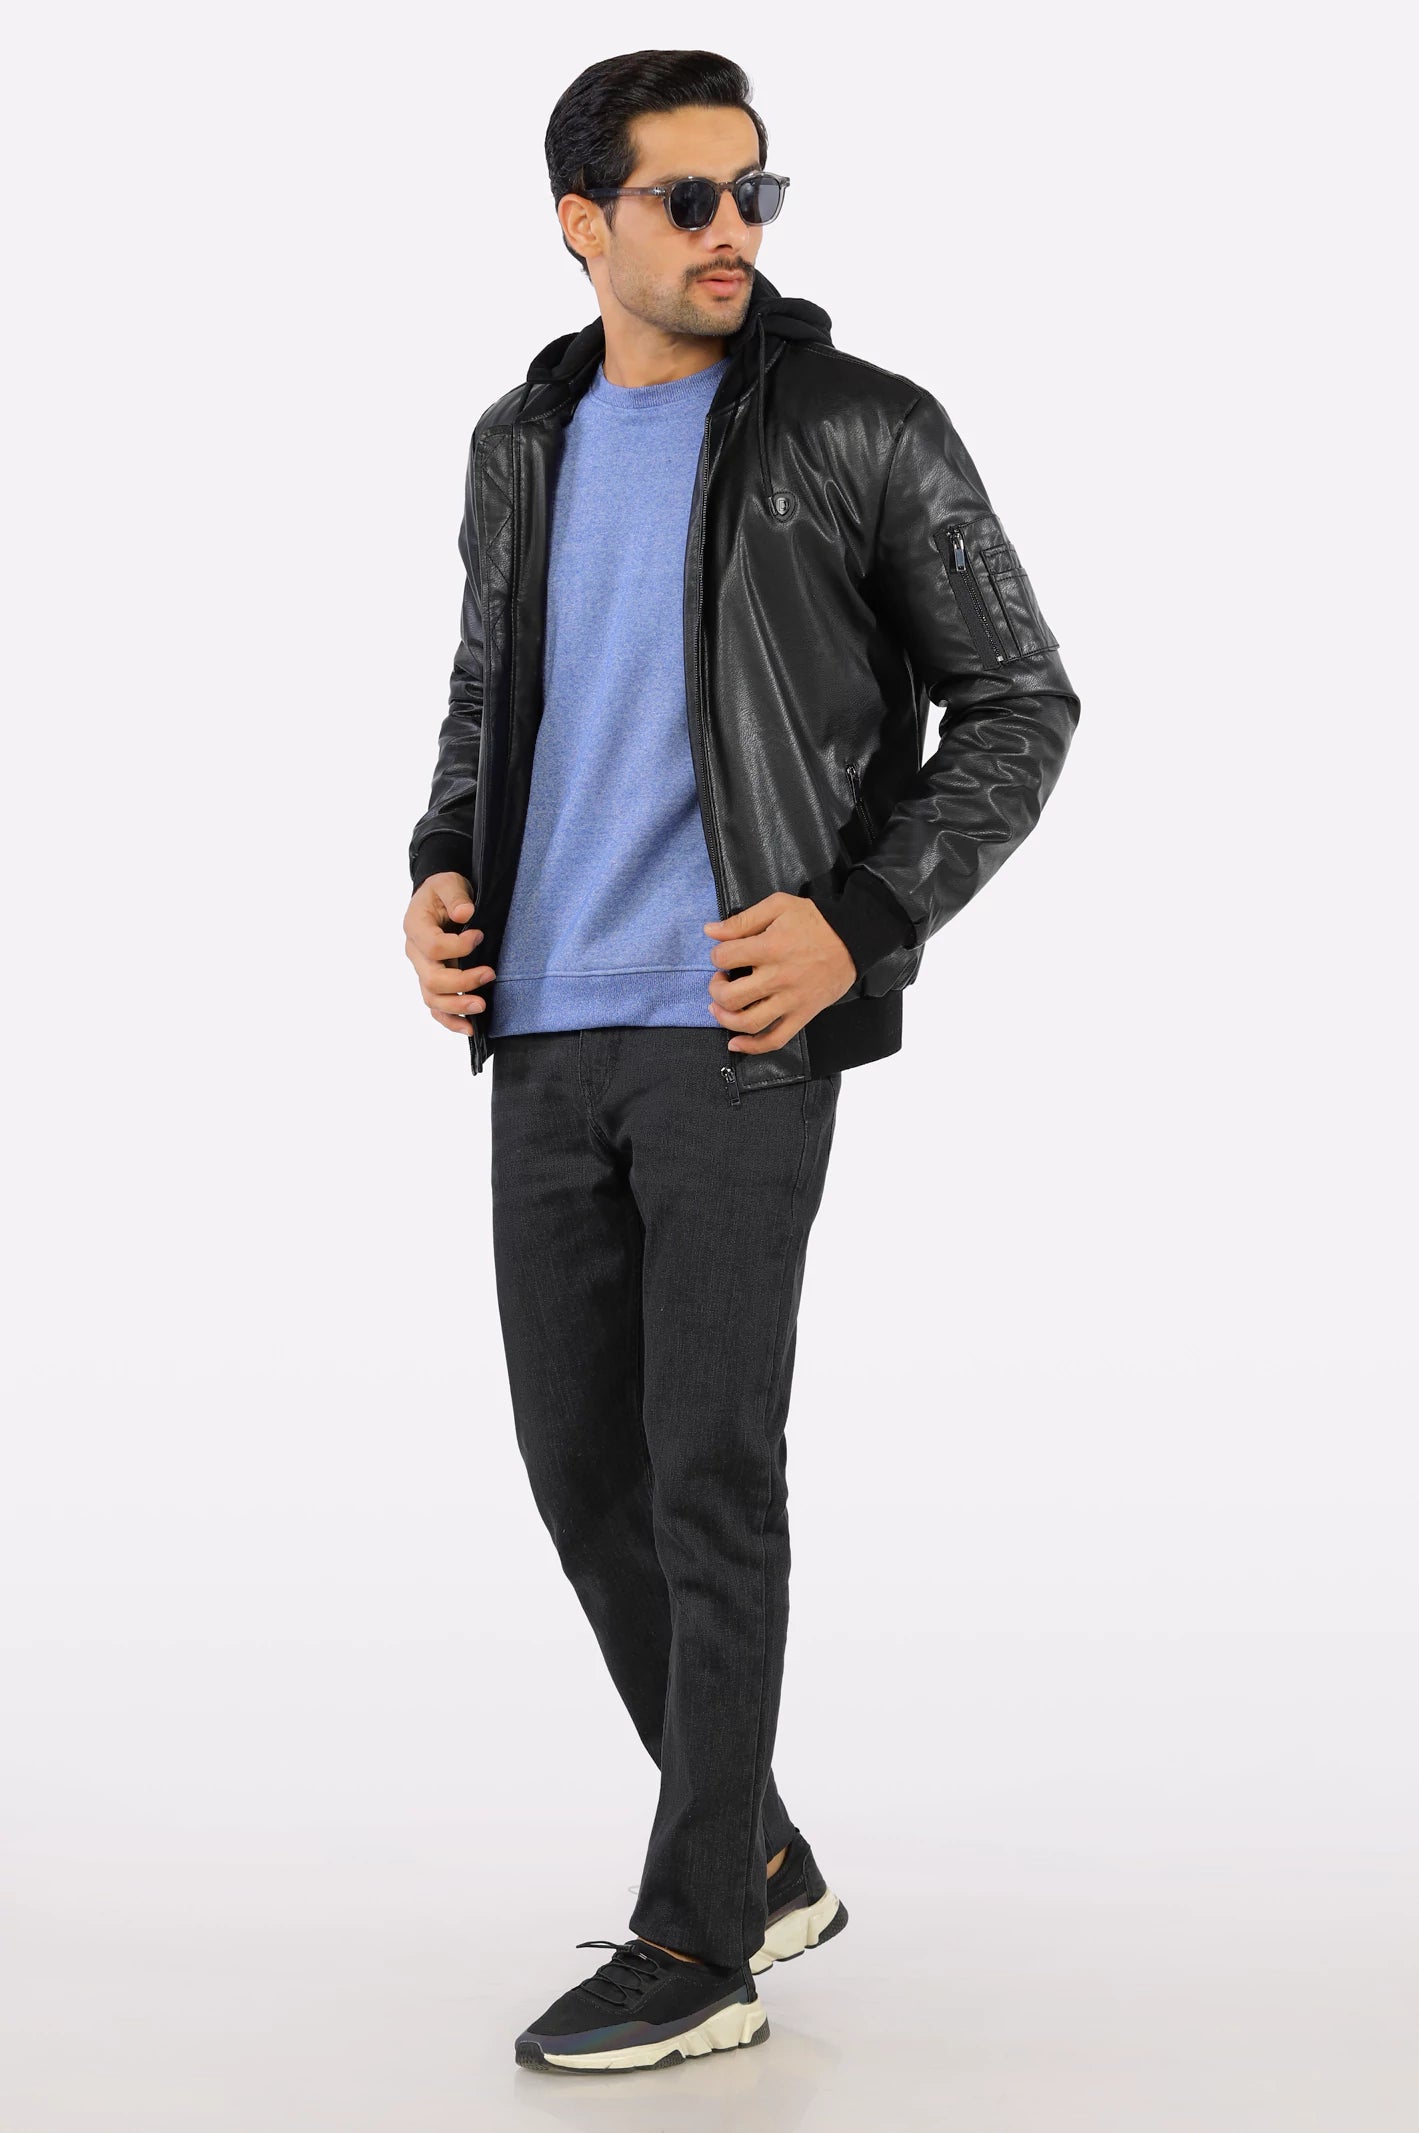 Synthetic Leather Jacket With Hood From Diners